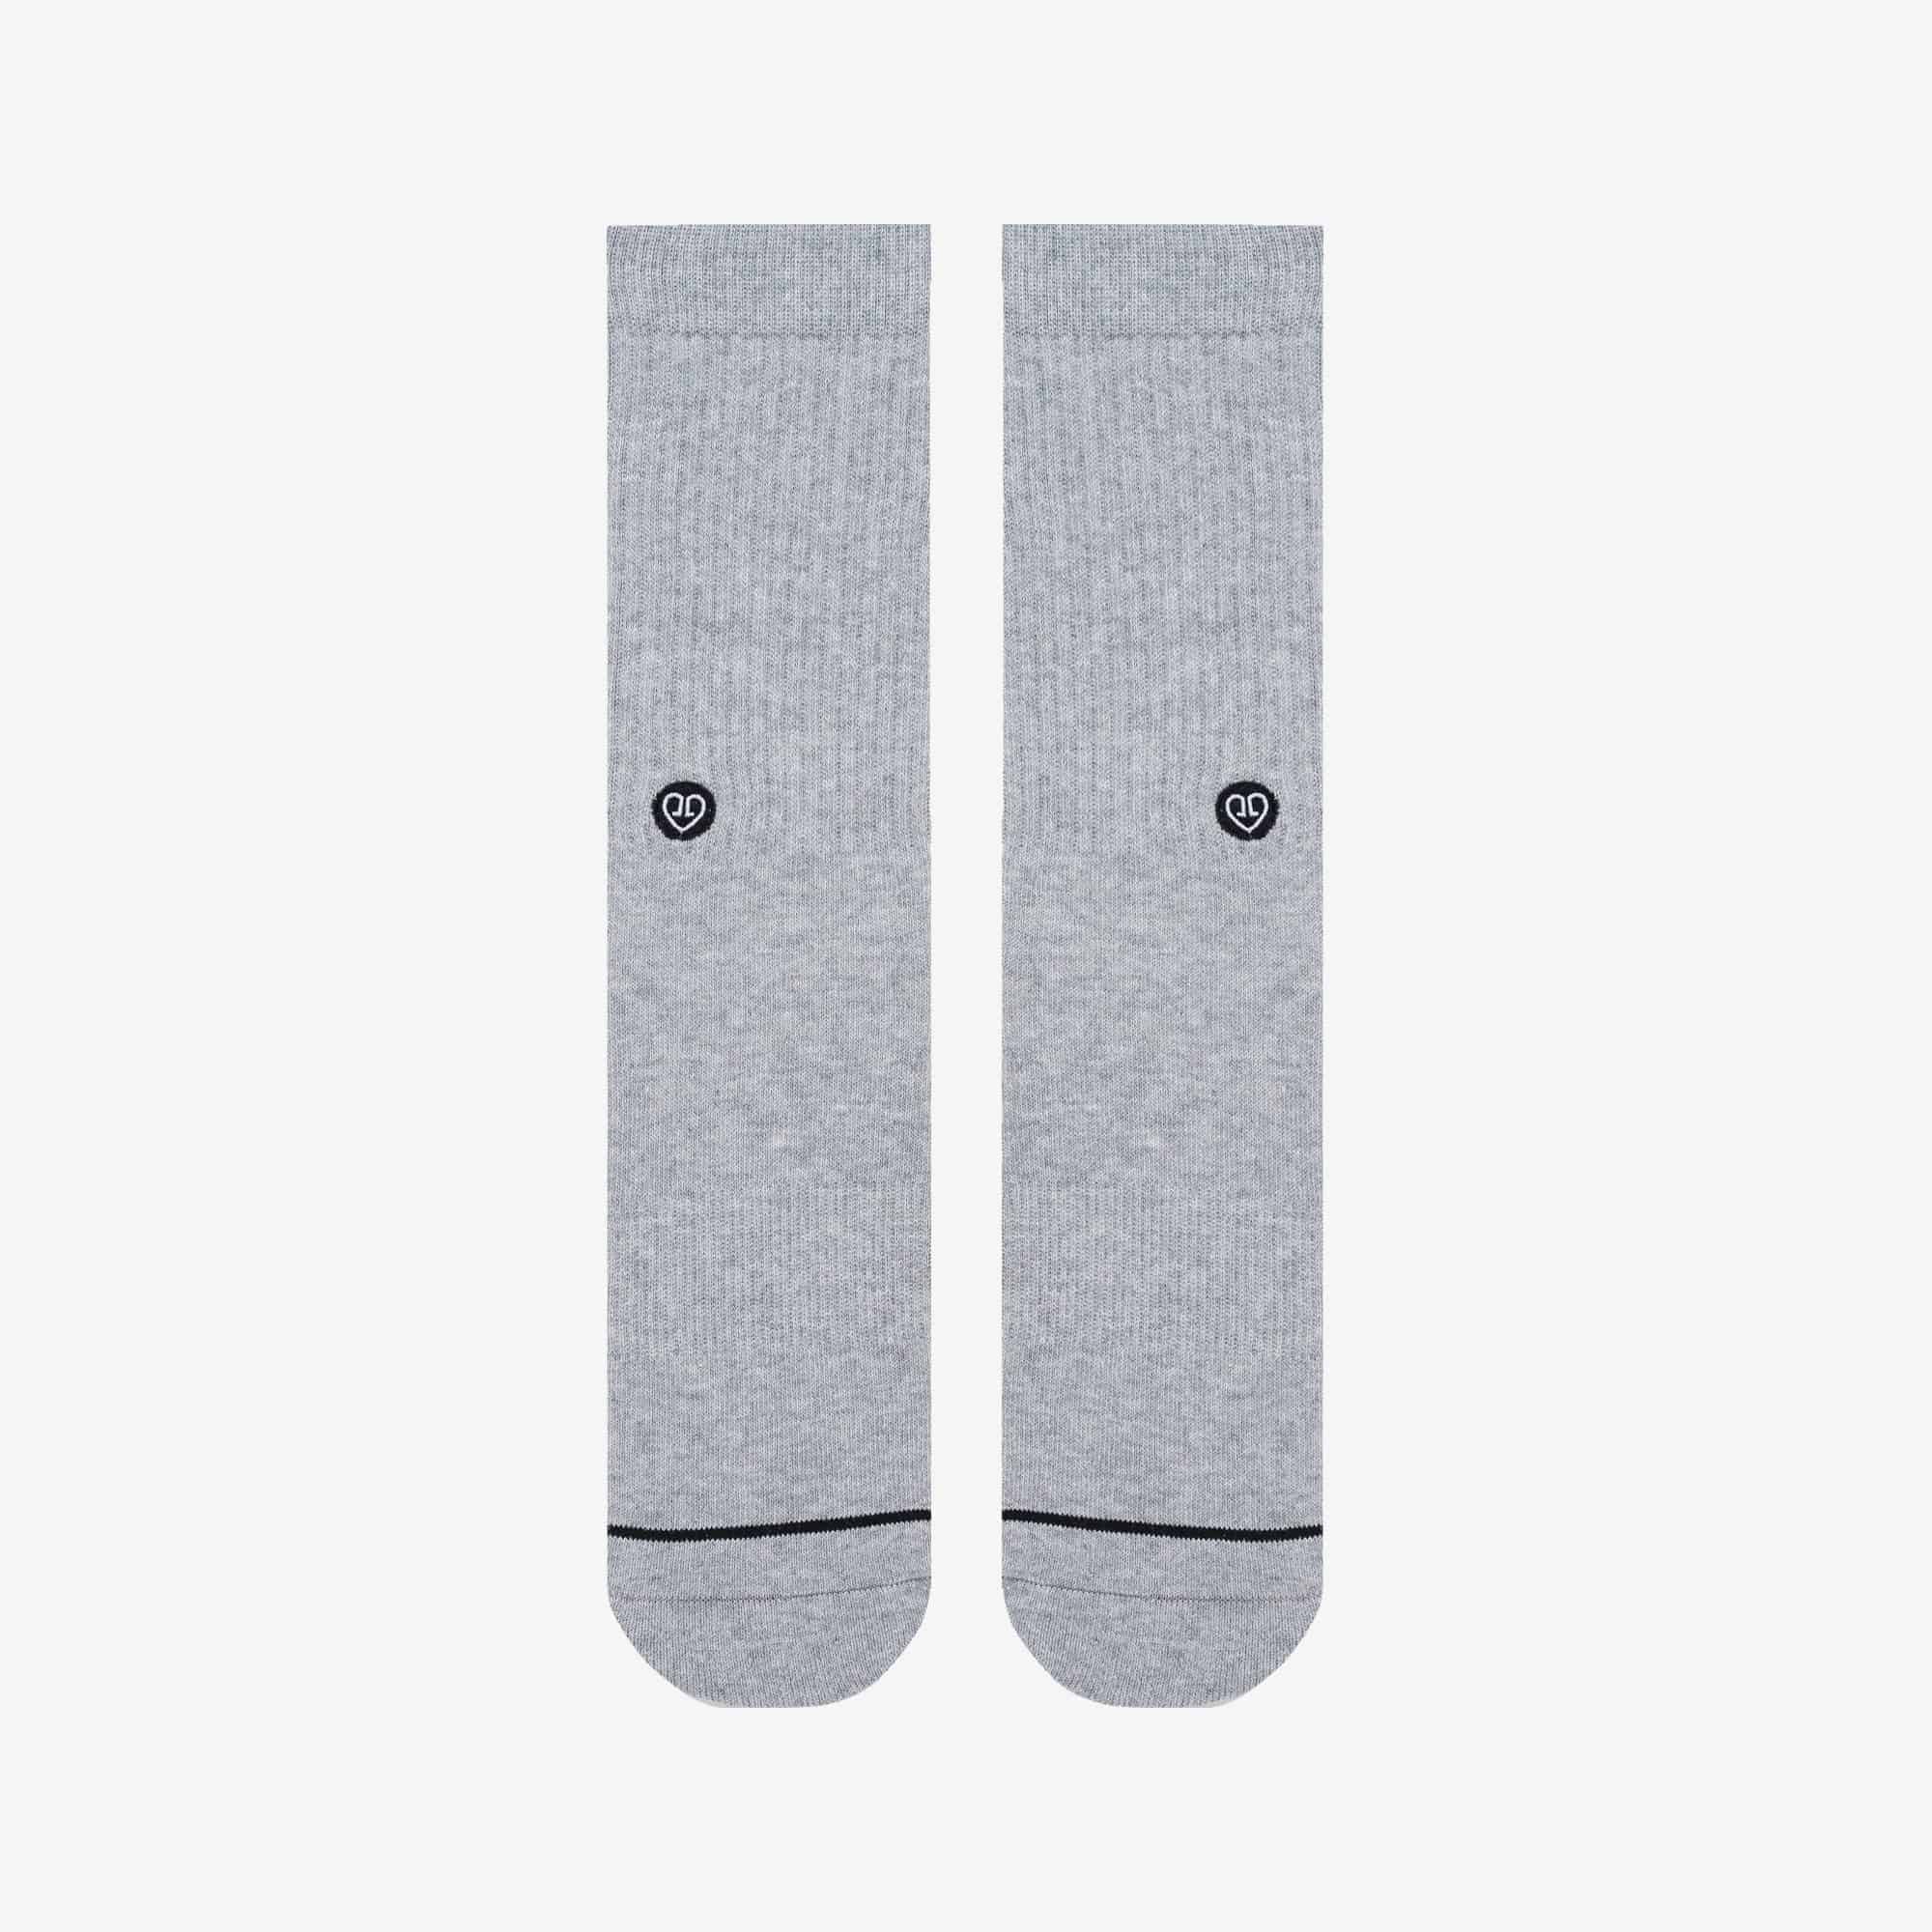 Blank Canvas in Grey | Socks by artists | Support the Arts